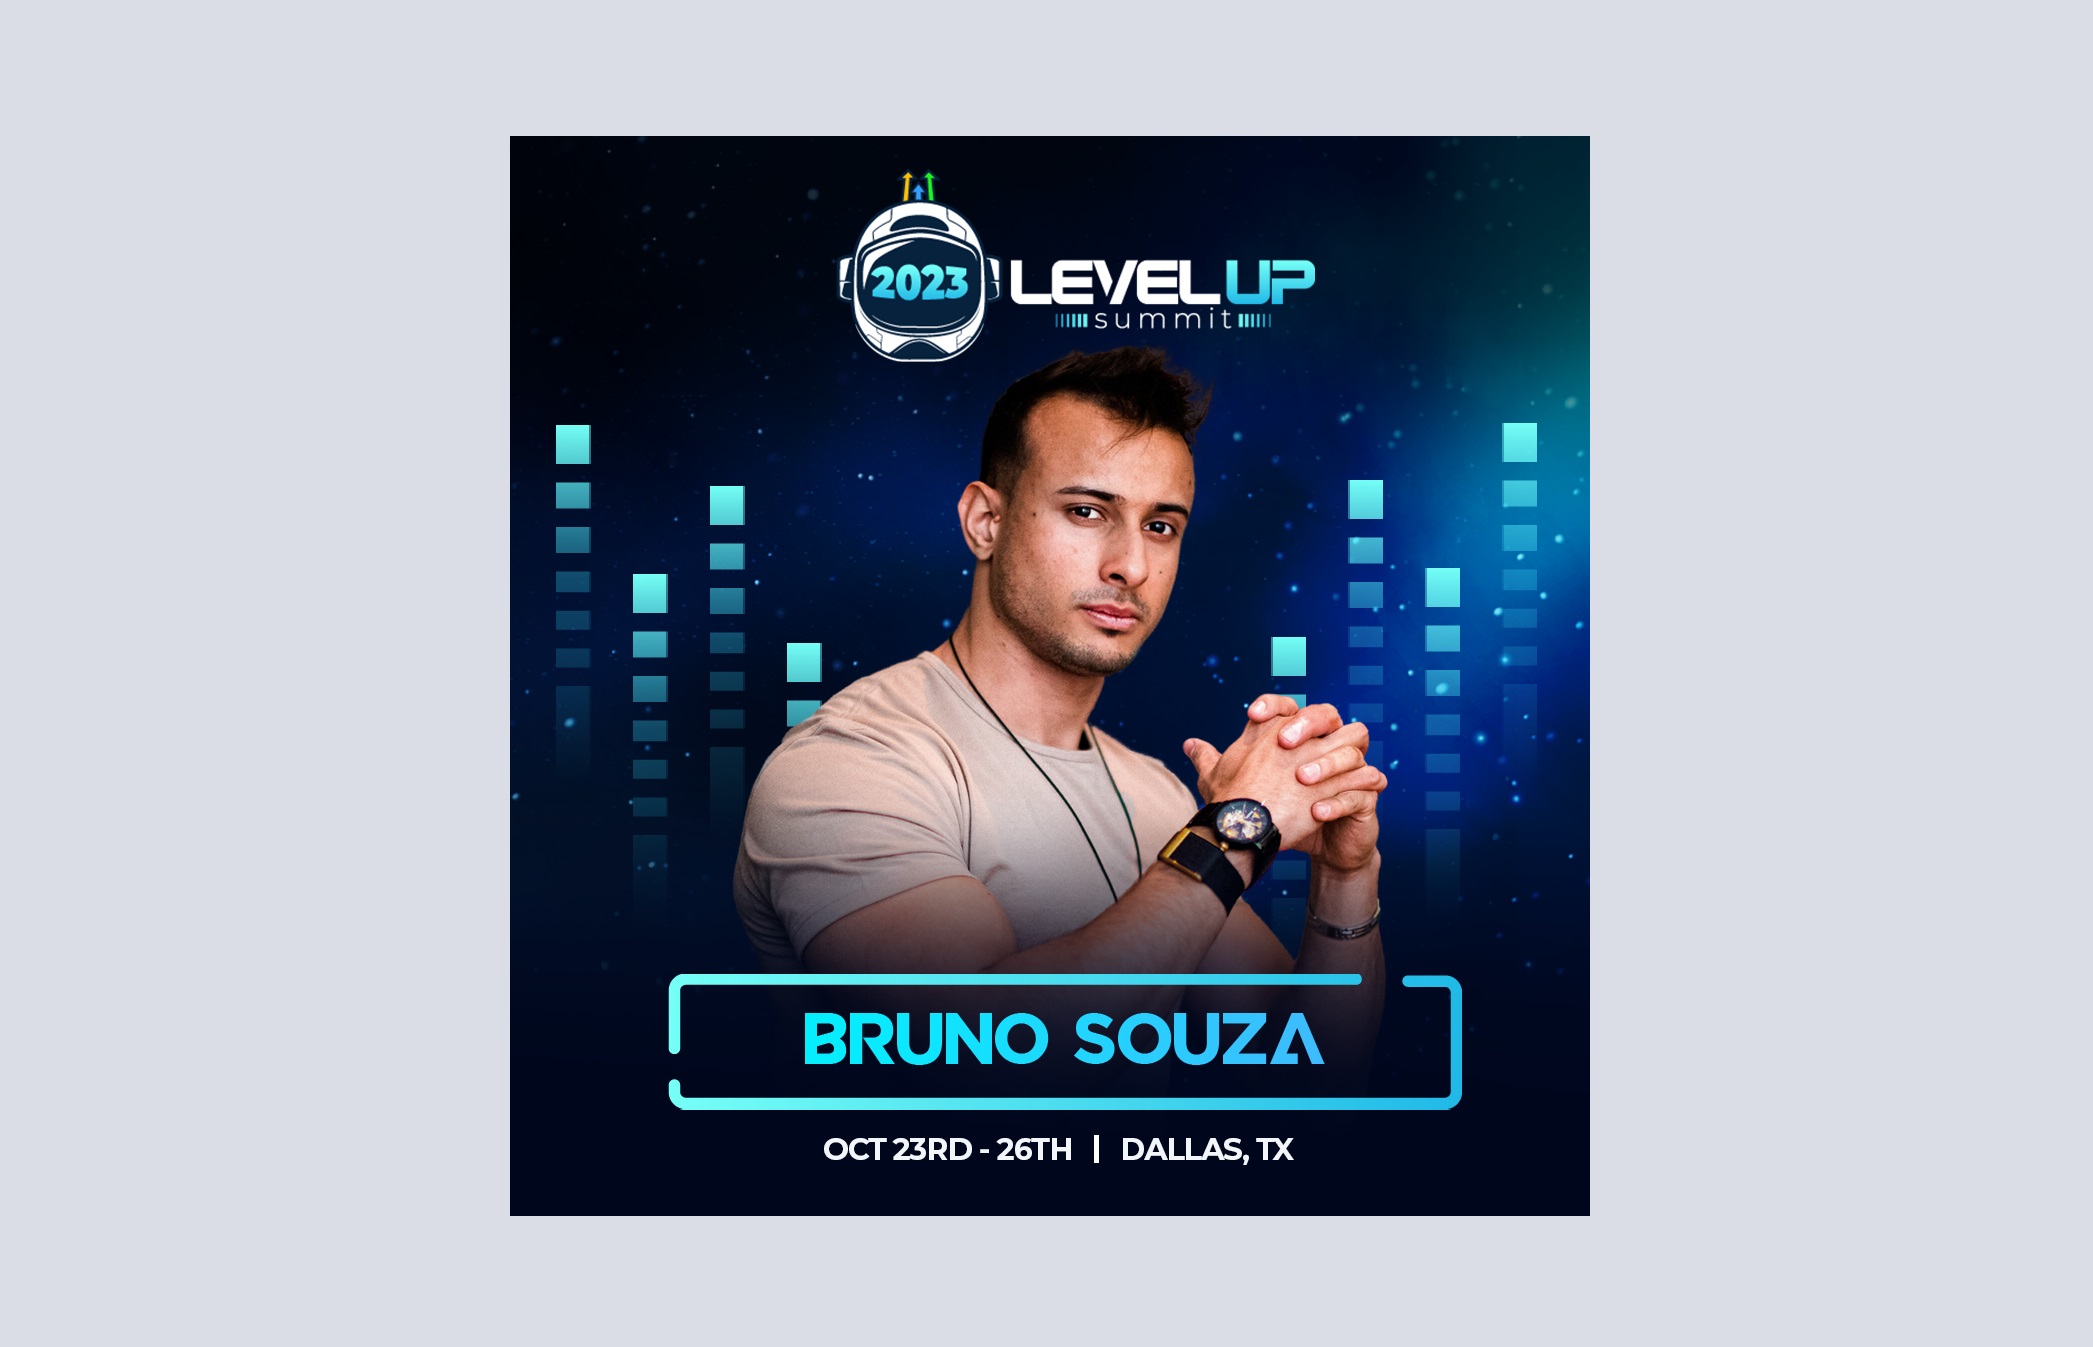 Bruno Souza Joins Elite Agency Owners Panel at Go Highlevel's 2023 Level Up Summit in Dallas!